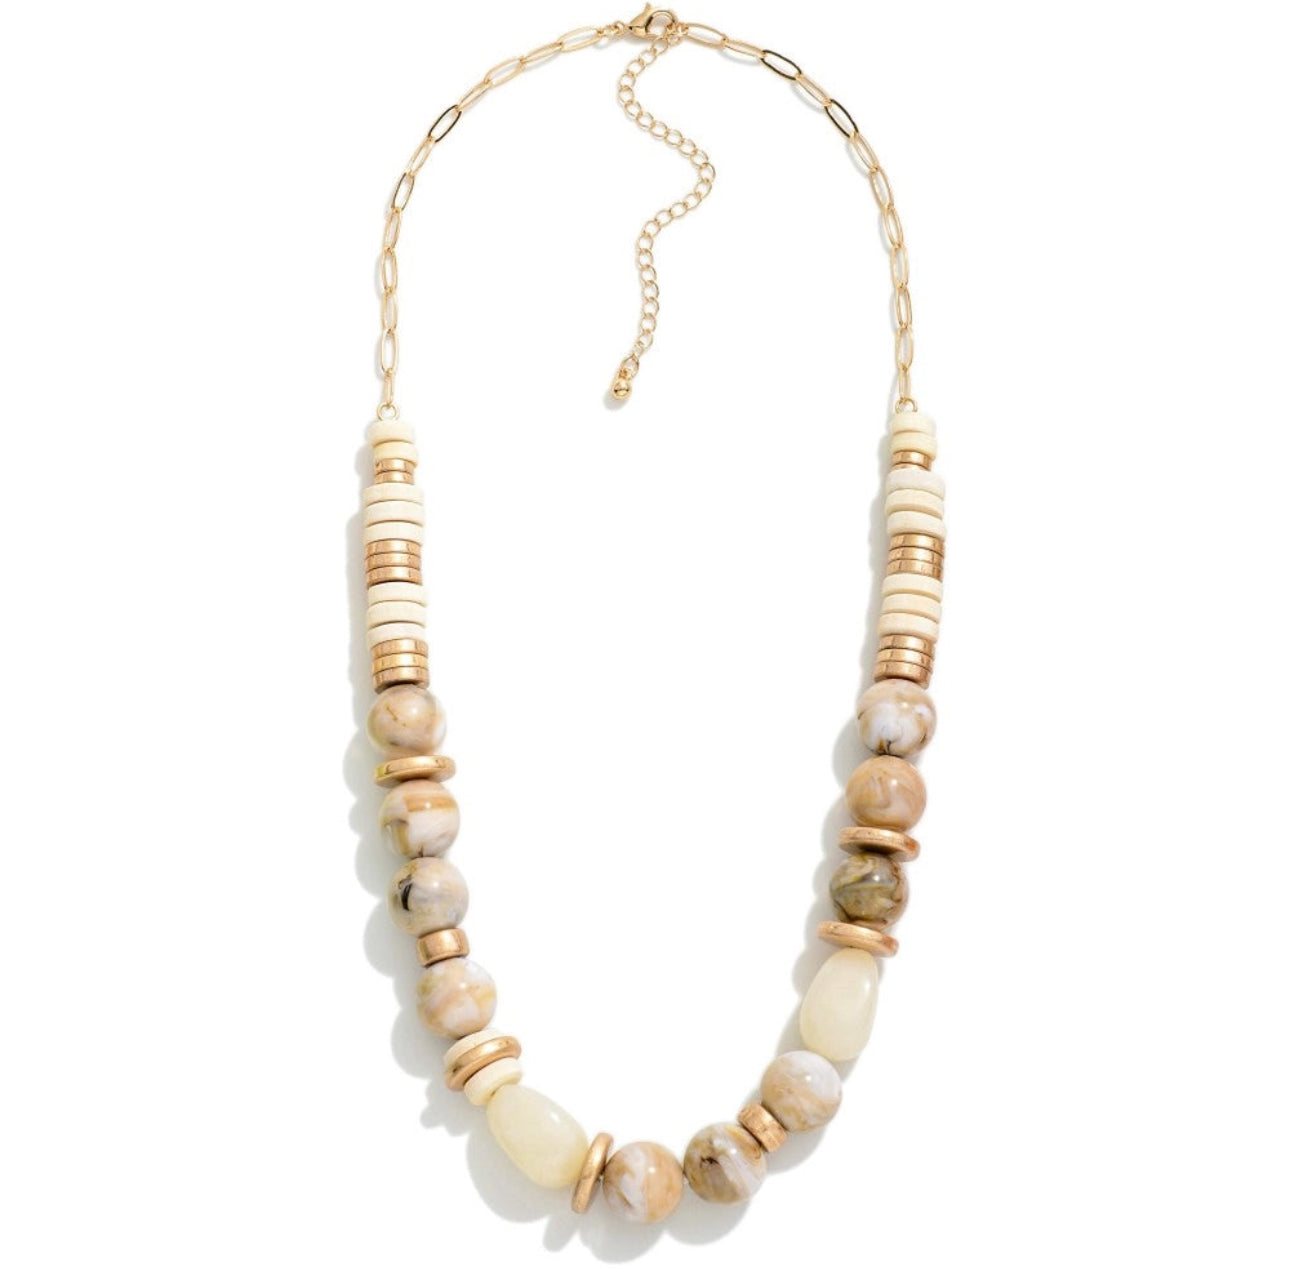 Marbled Beaded Necklace Featuring Wood Disc Details